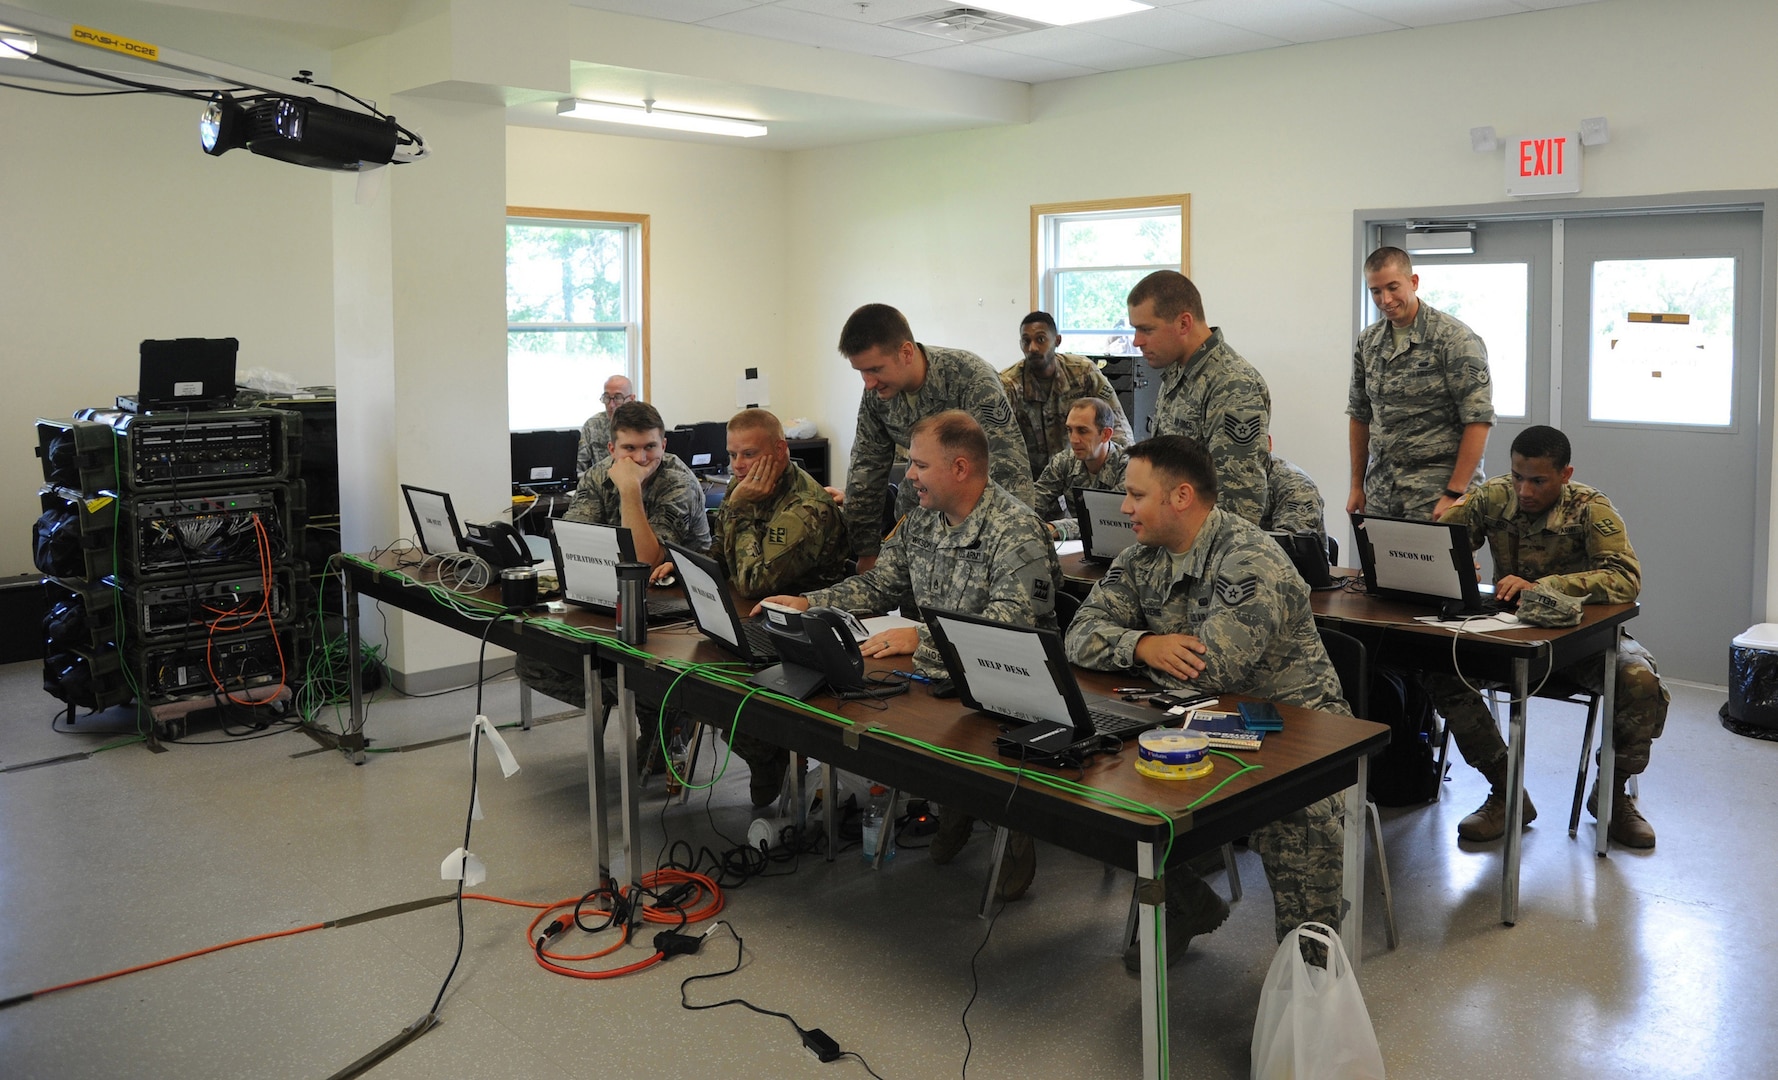 Airmen and Soldiers gather during Exercise Patriot Warrior for cyber defense training on Aug. 8, 2018, at Fort McCoy, Wisc. Patriot Warrior is Air Force Reserve Command’s premier exercise, providing an opportunity for Reserve Citizen-Airmen to train with joint partners in the combat support training exercise.